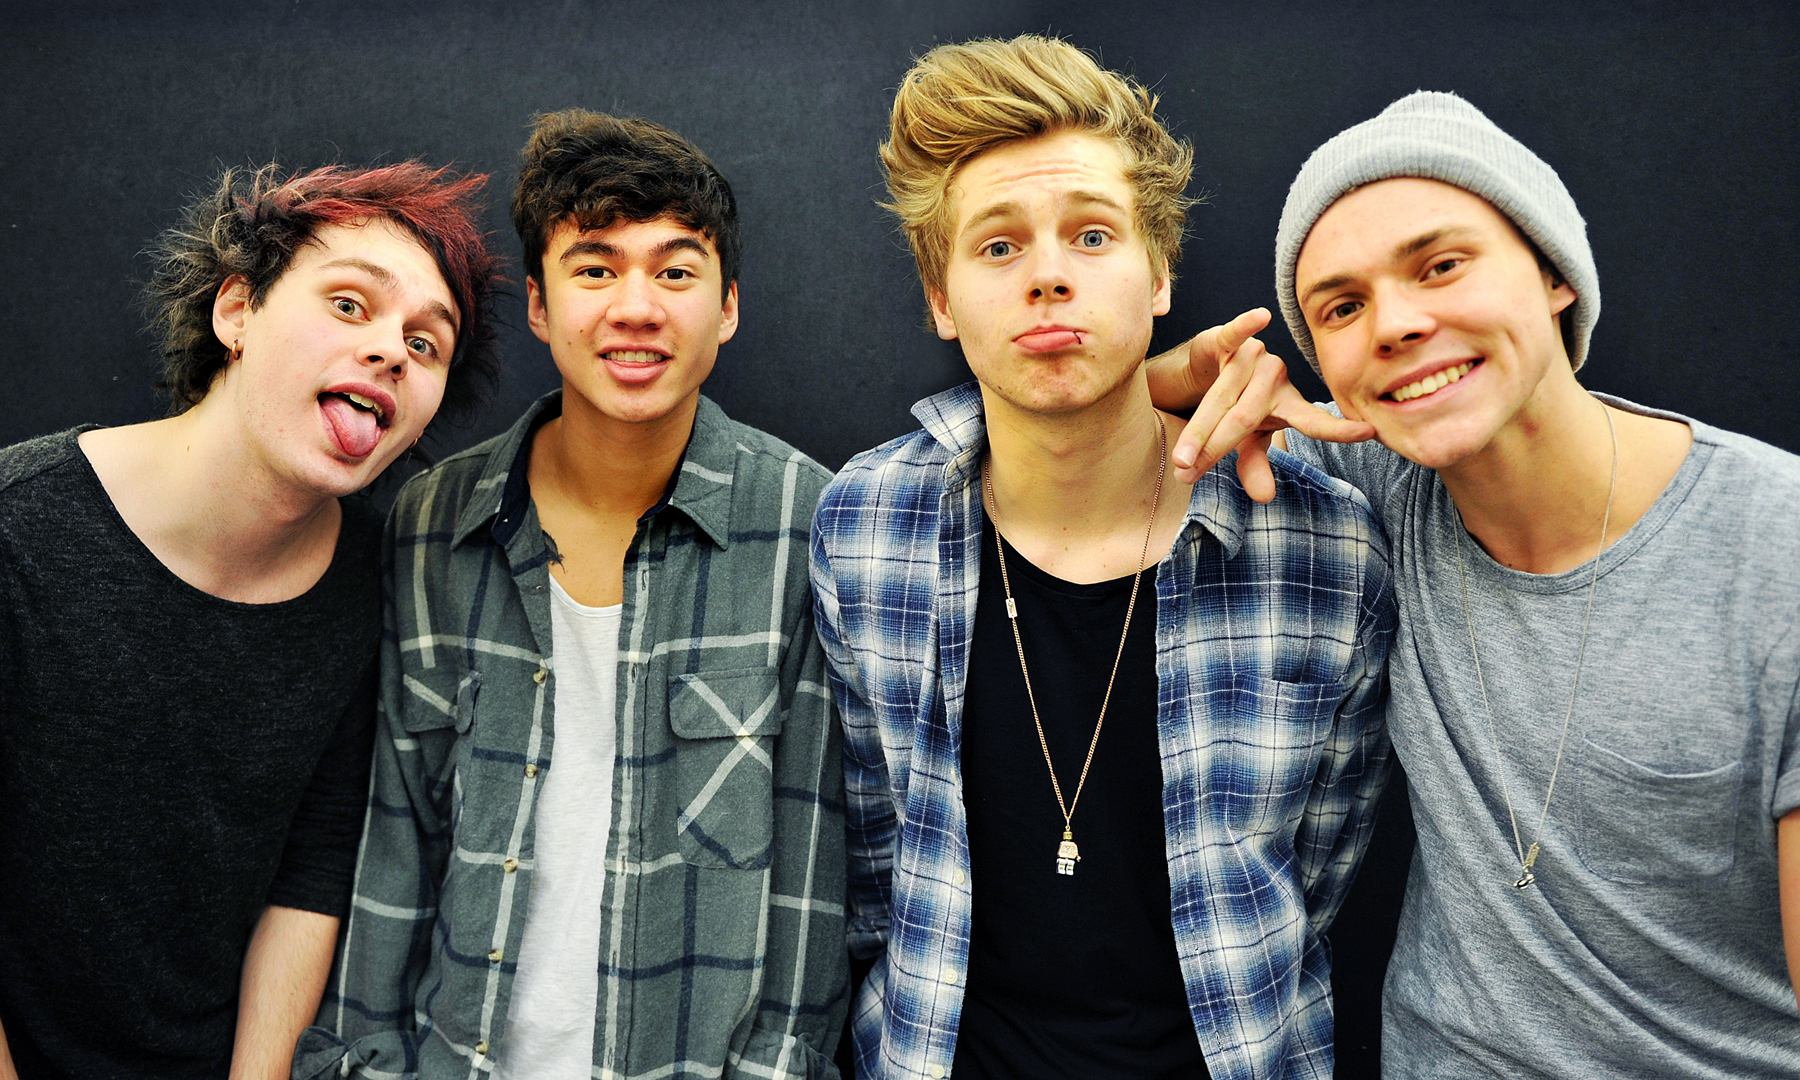 5 Seconds Of Summer Image - ID: 203696 - Image Abyss.